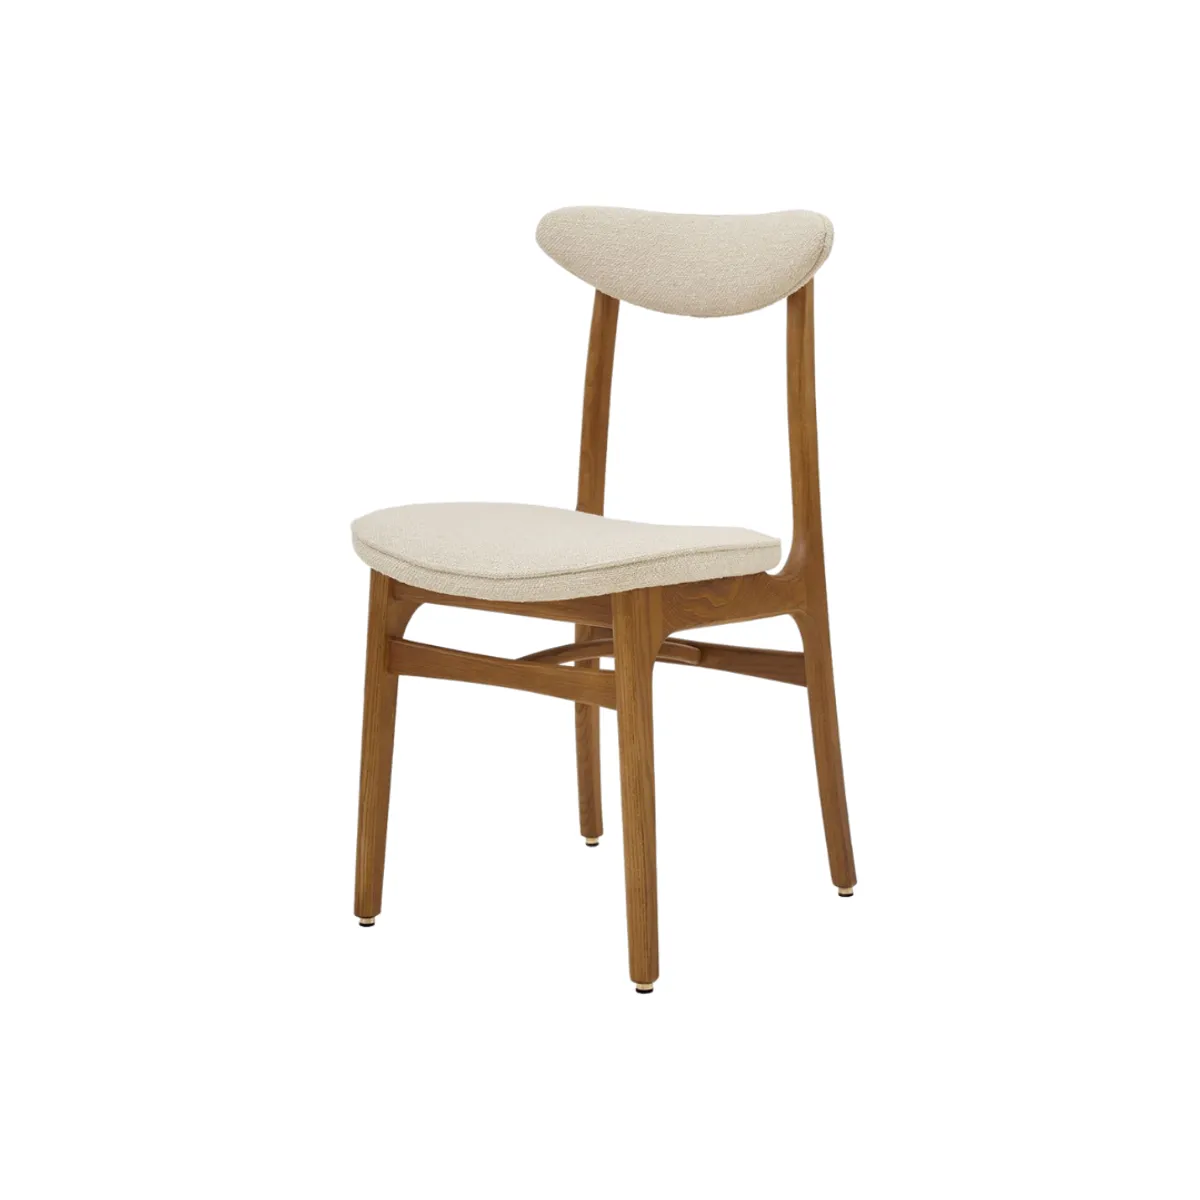 200-190 side chair 4